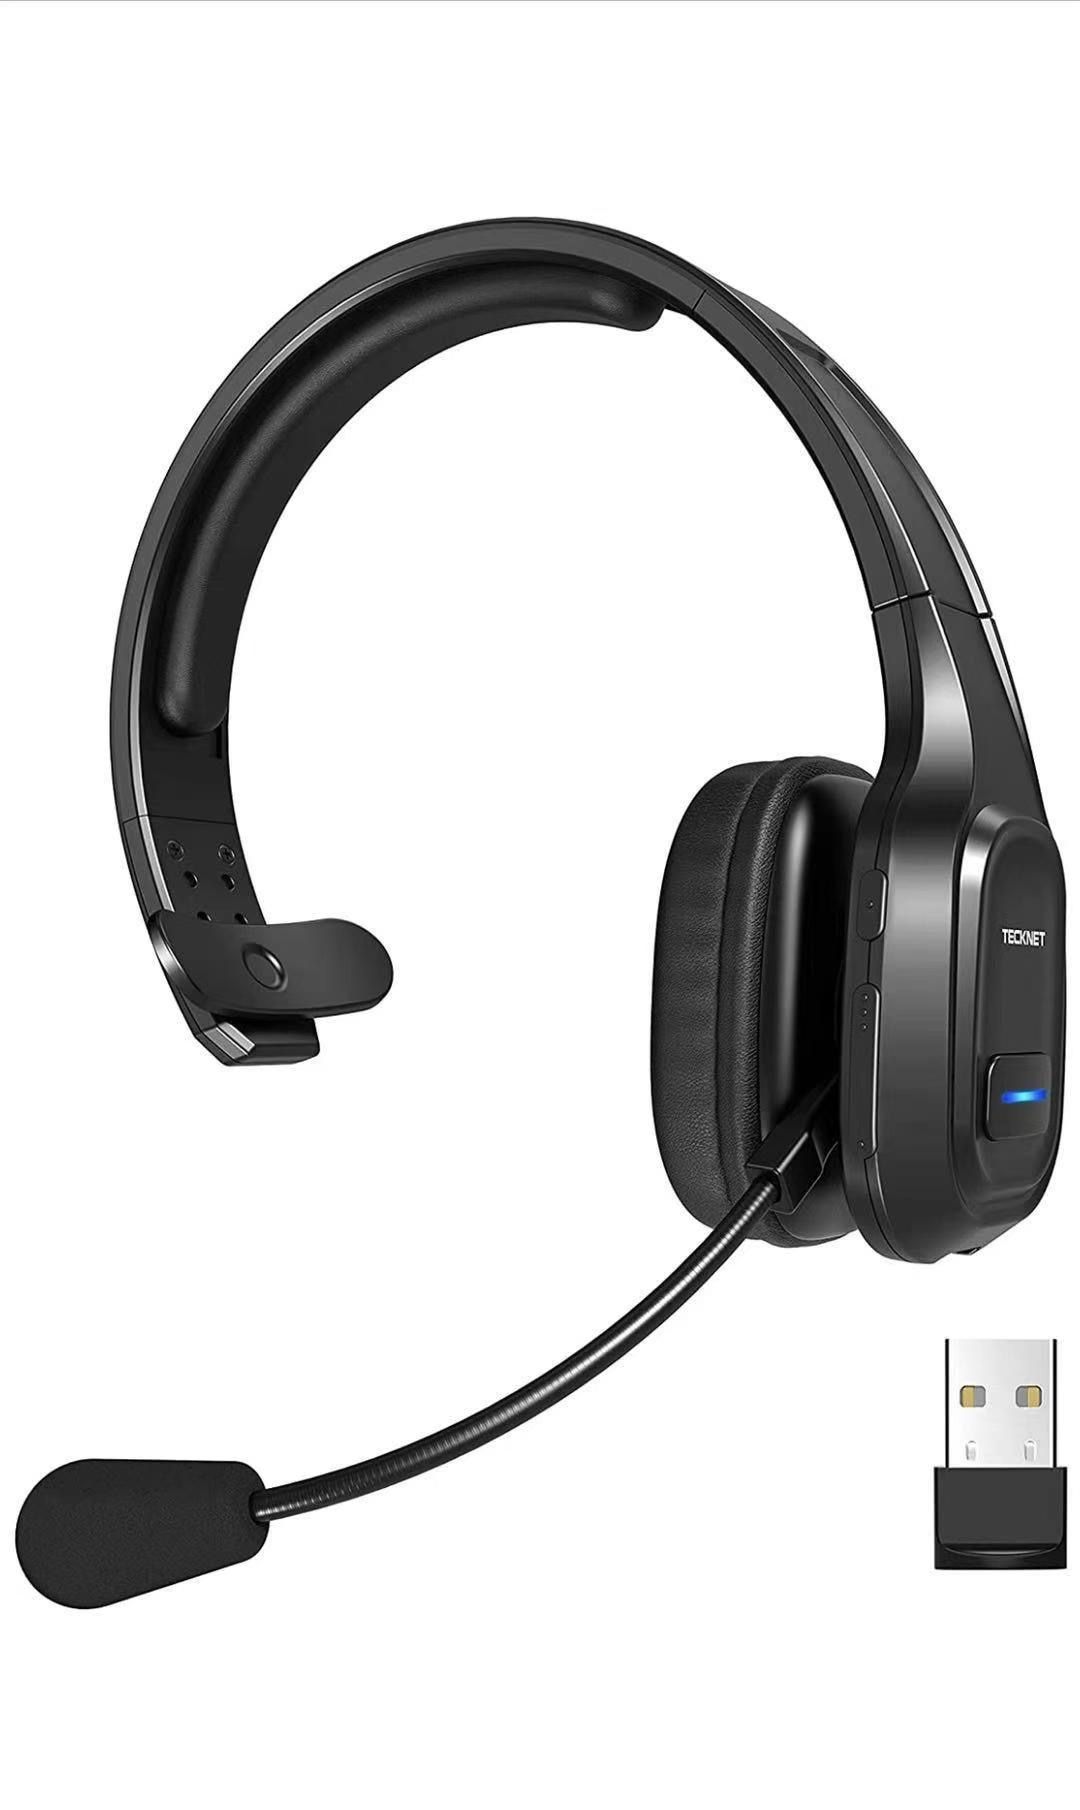 Bluetooth Trucker Headset with Microphone Noise Canceling Wireless On Ear Headphones, Hands Free Telephone Headset for Cell Phone Computer